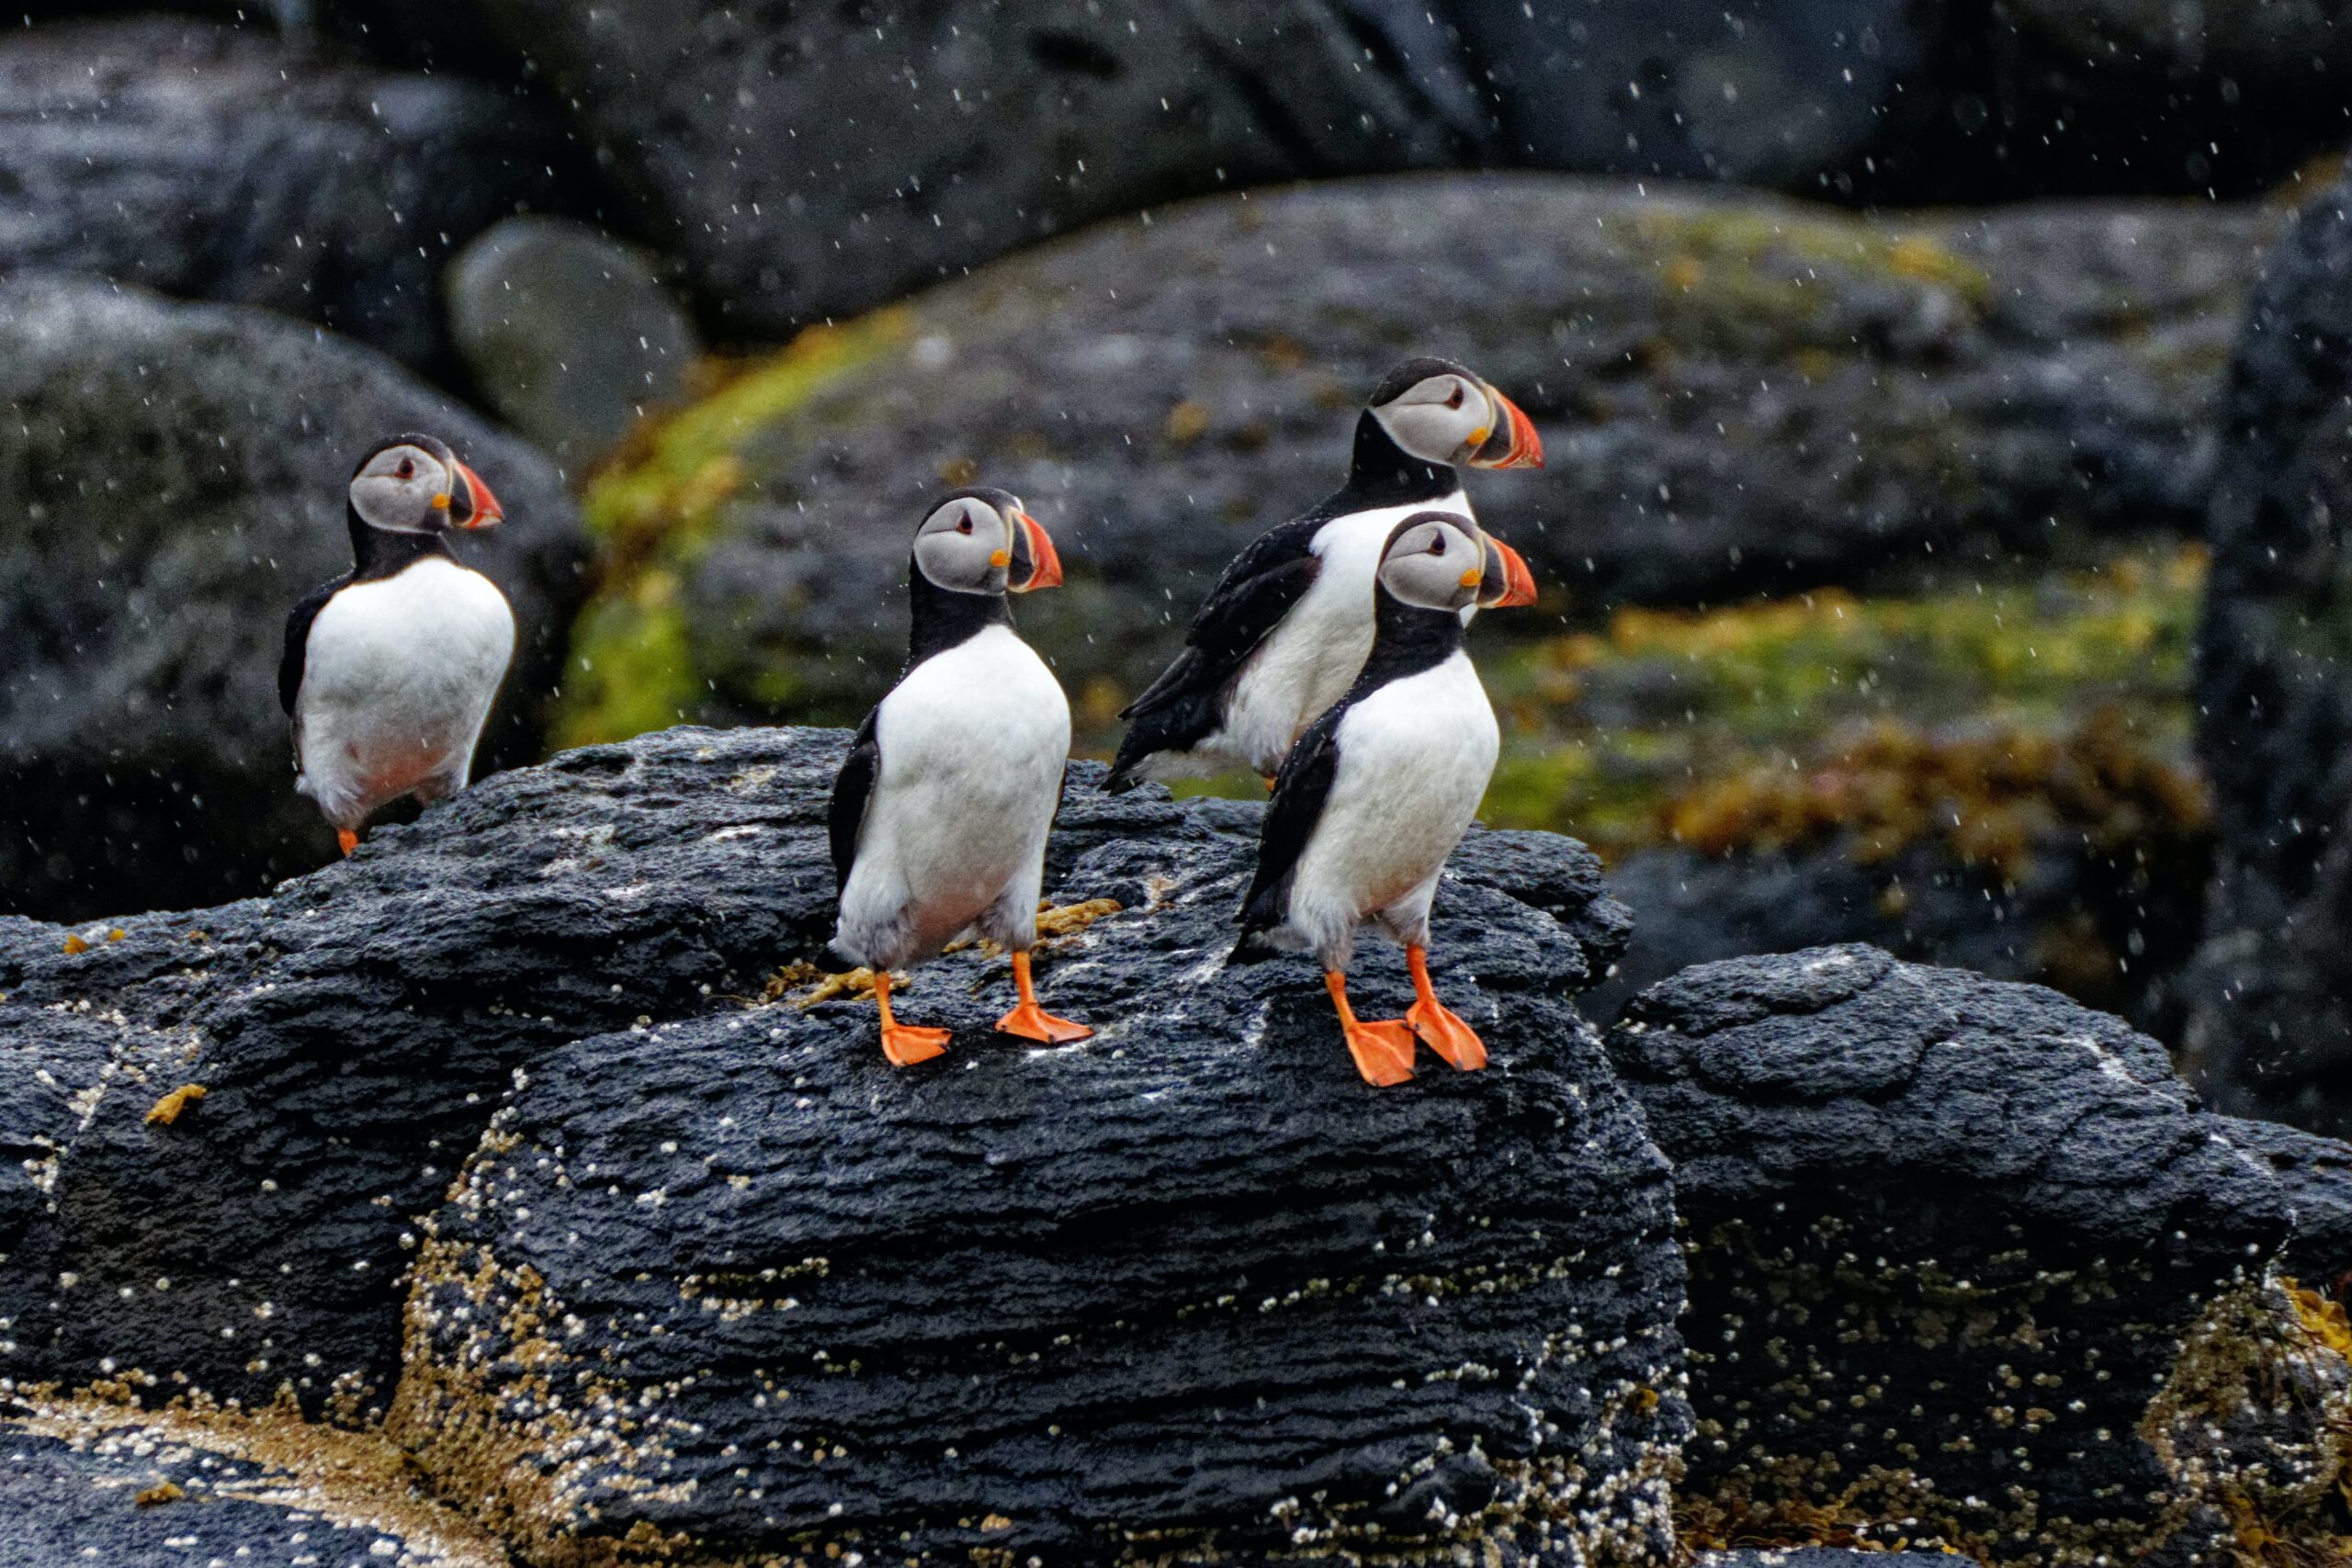 Puffins in the rain, Iceland